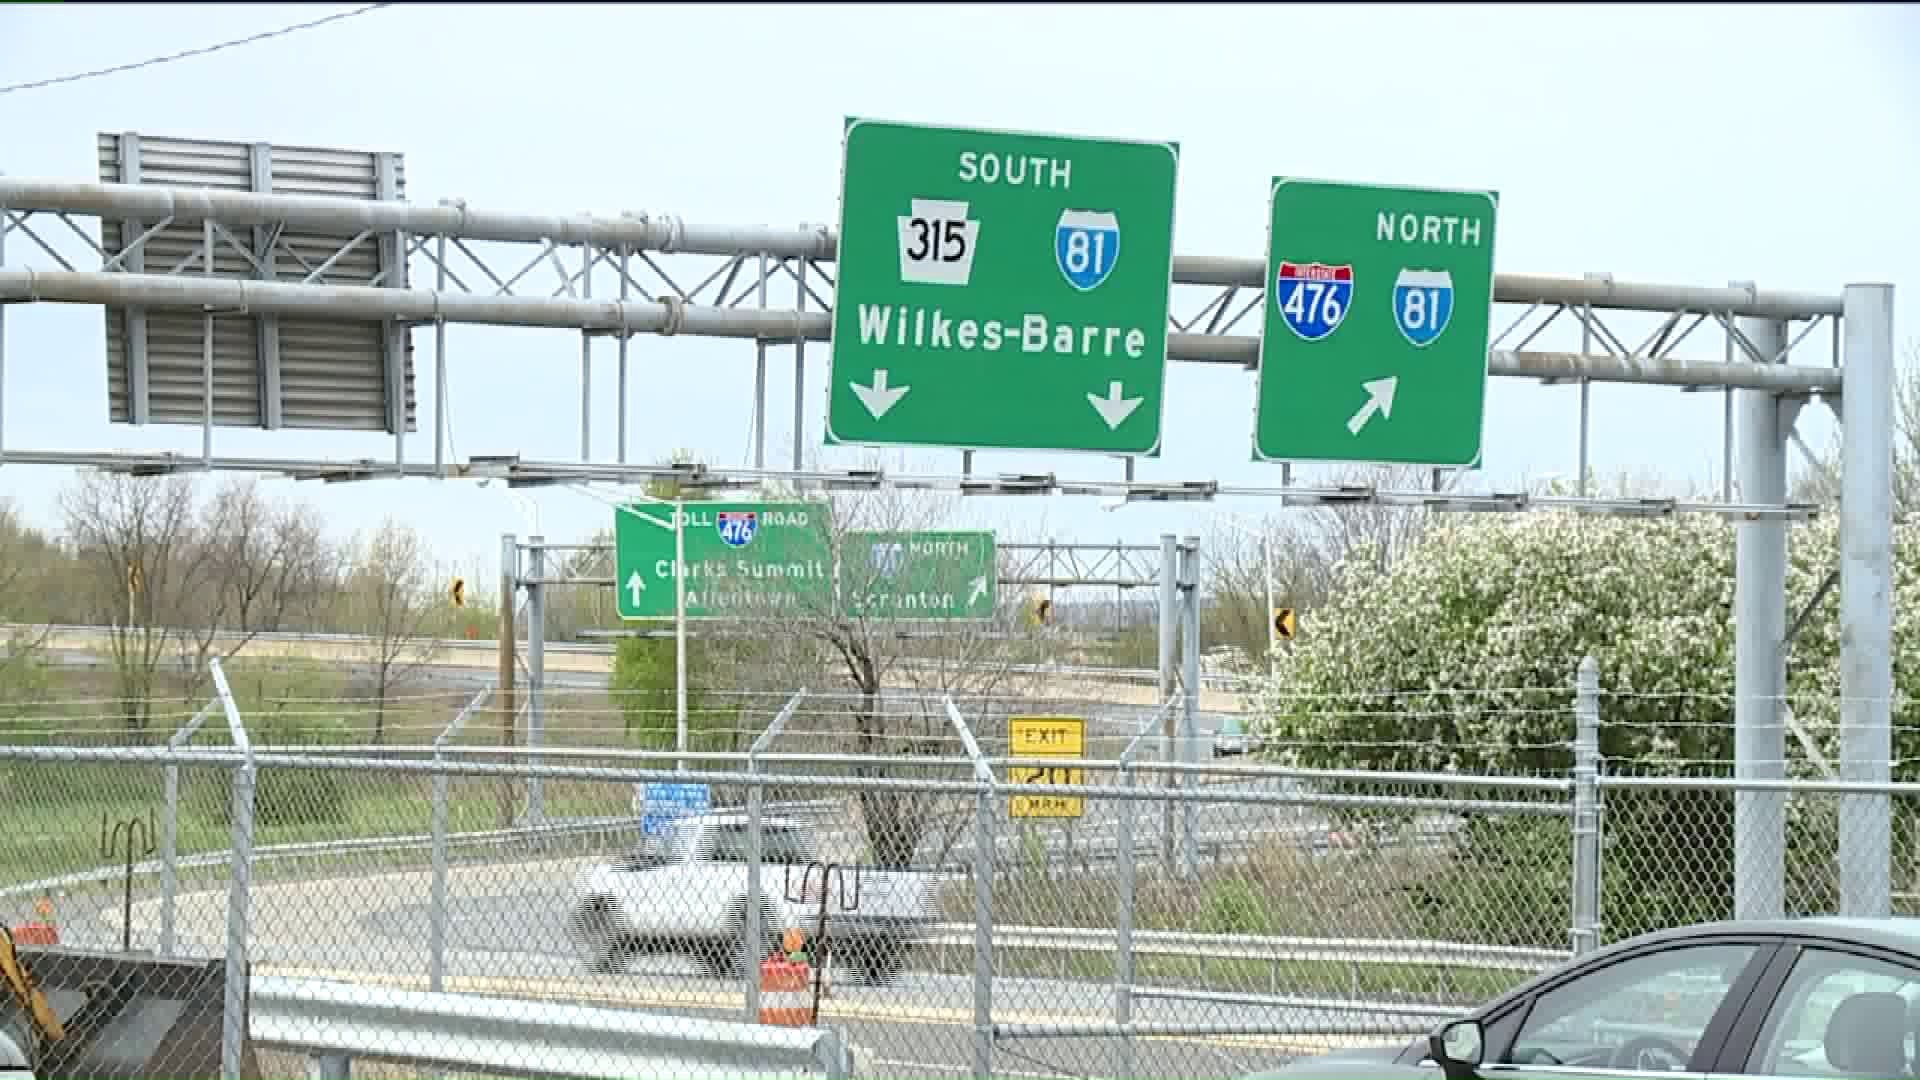 Drivers Prepare for Backups with Scheduled Roadwork on I-81